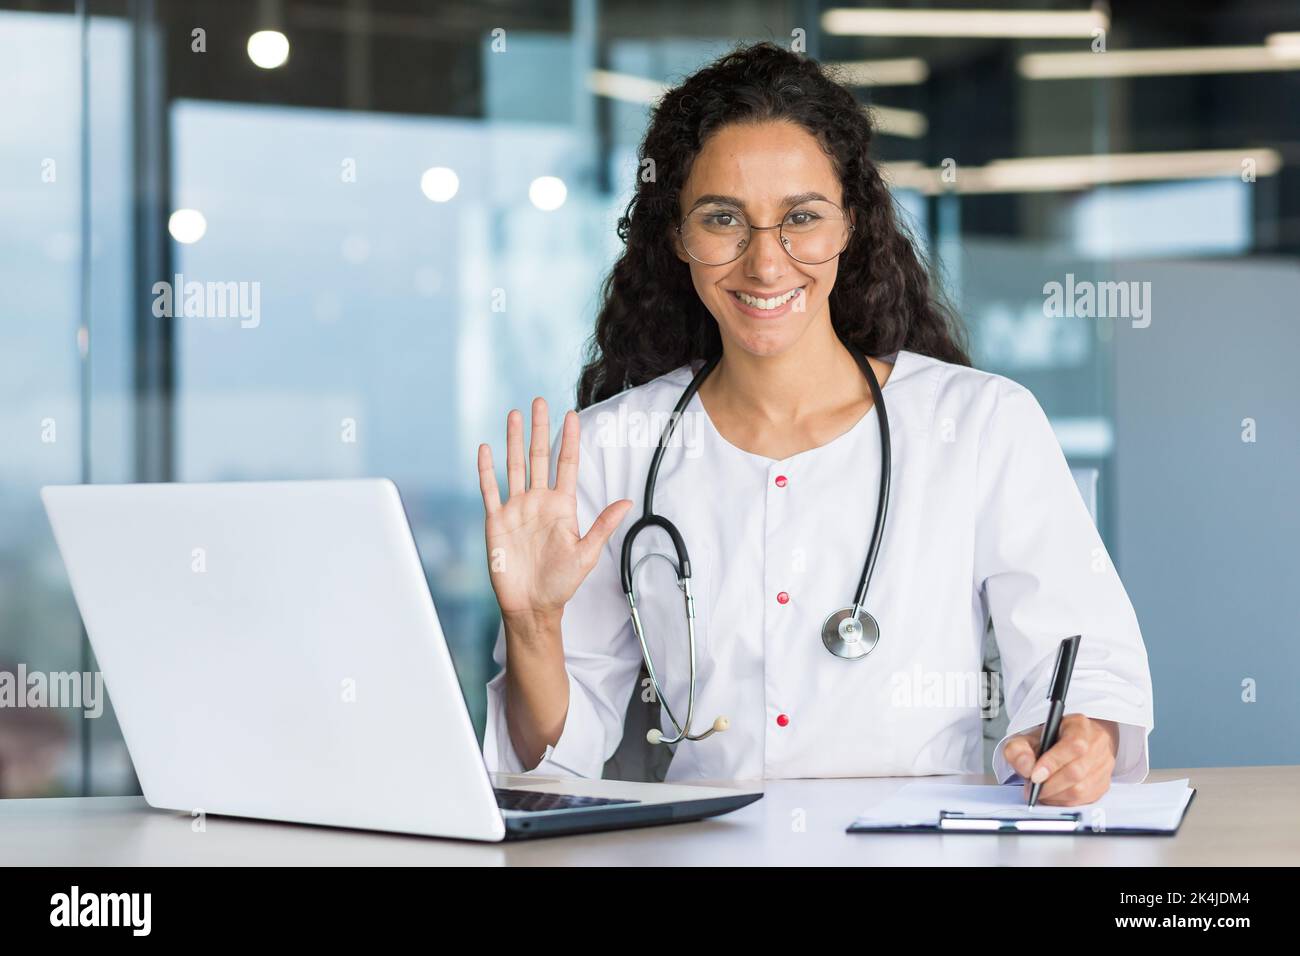 Portrait of a hispanic woman doctor veterinarian. He sits in the office, conducts an online consultation with a laptop, looks and waves at the camera. Records the diagnosis, treatment of the animal. Stock Photo